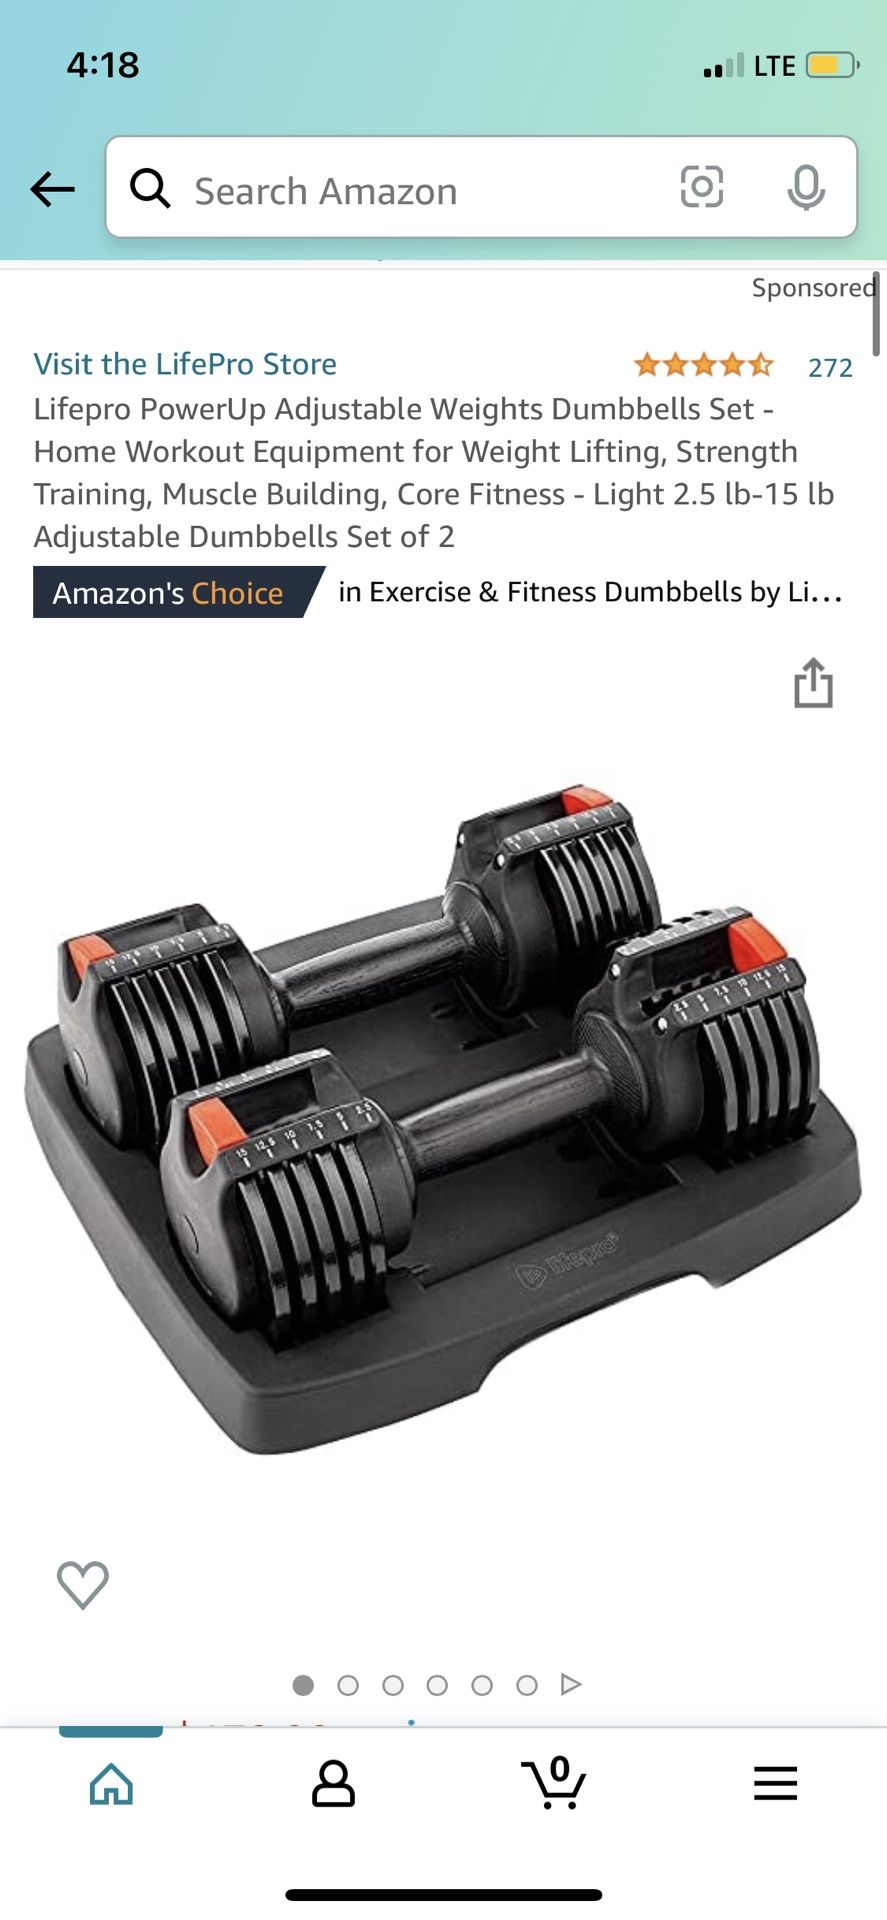 Lifepro PowerUp Adjustable Weights Dumbbells Set - Home Workout Equipment for Weight Lifting, Strength Training, Muscle Building, Core Fitness - Light